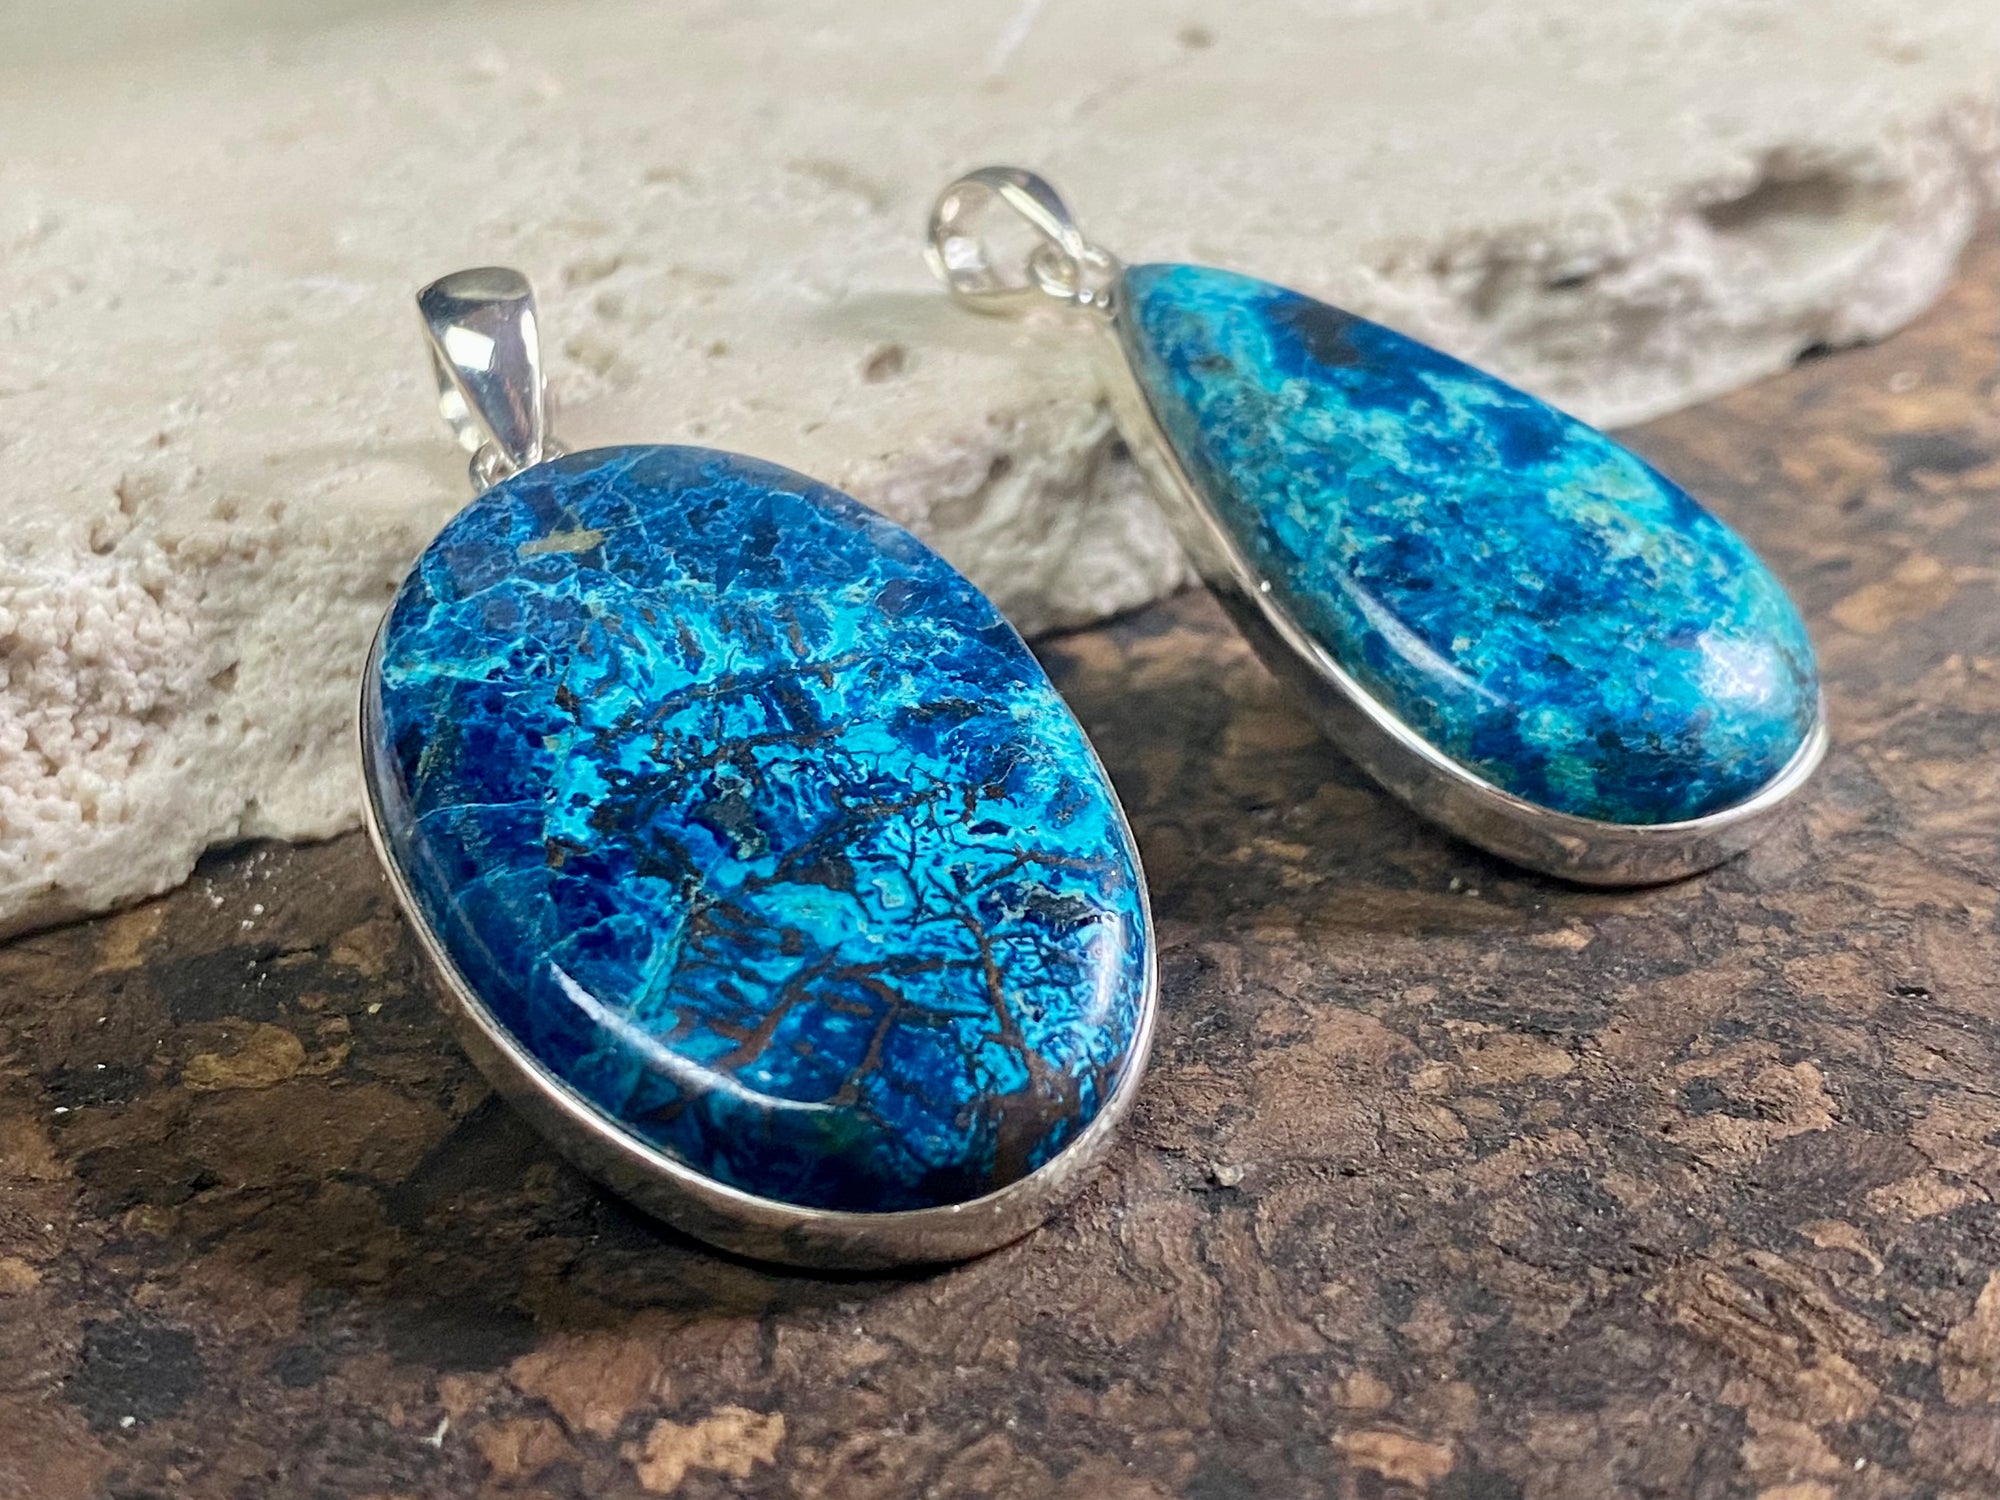 Unusual and striking azurite pendants. Set off by sterling silver bezels, topped by generous sized bails large enough to accommodate a thick chain or cord. If you're looking for something a little bit different, these pendants are stunning.